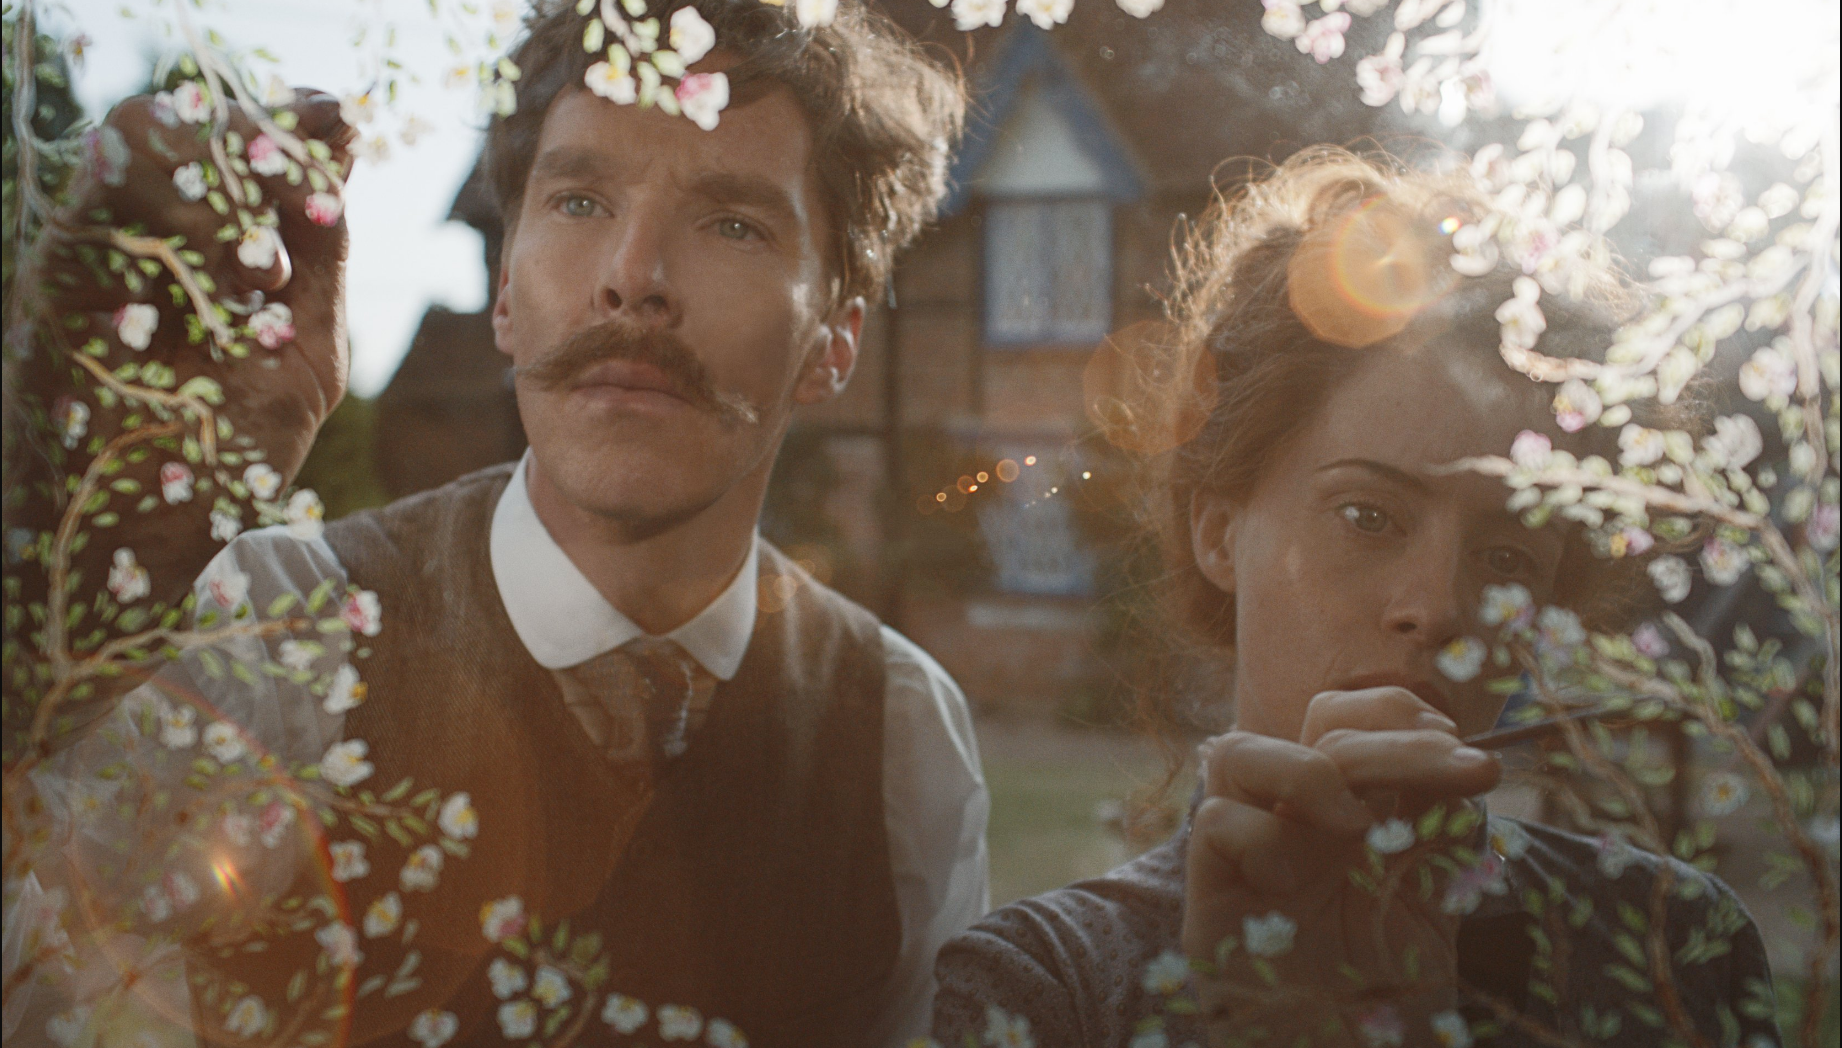 The Electrical Life of Louis Wain Benedict Cumberbatch and Claire Foy